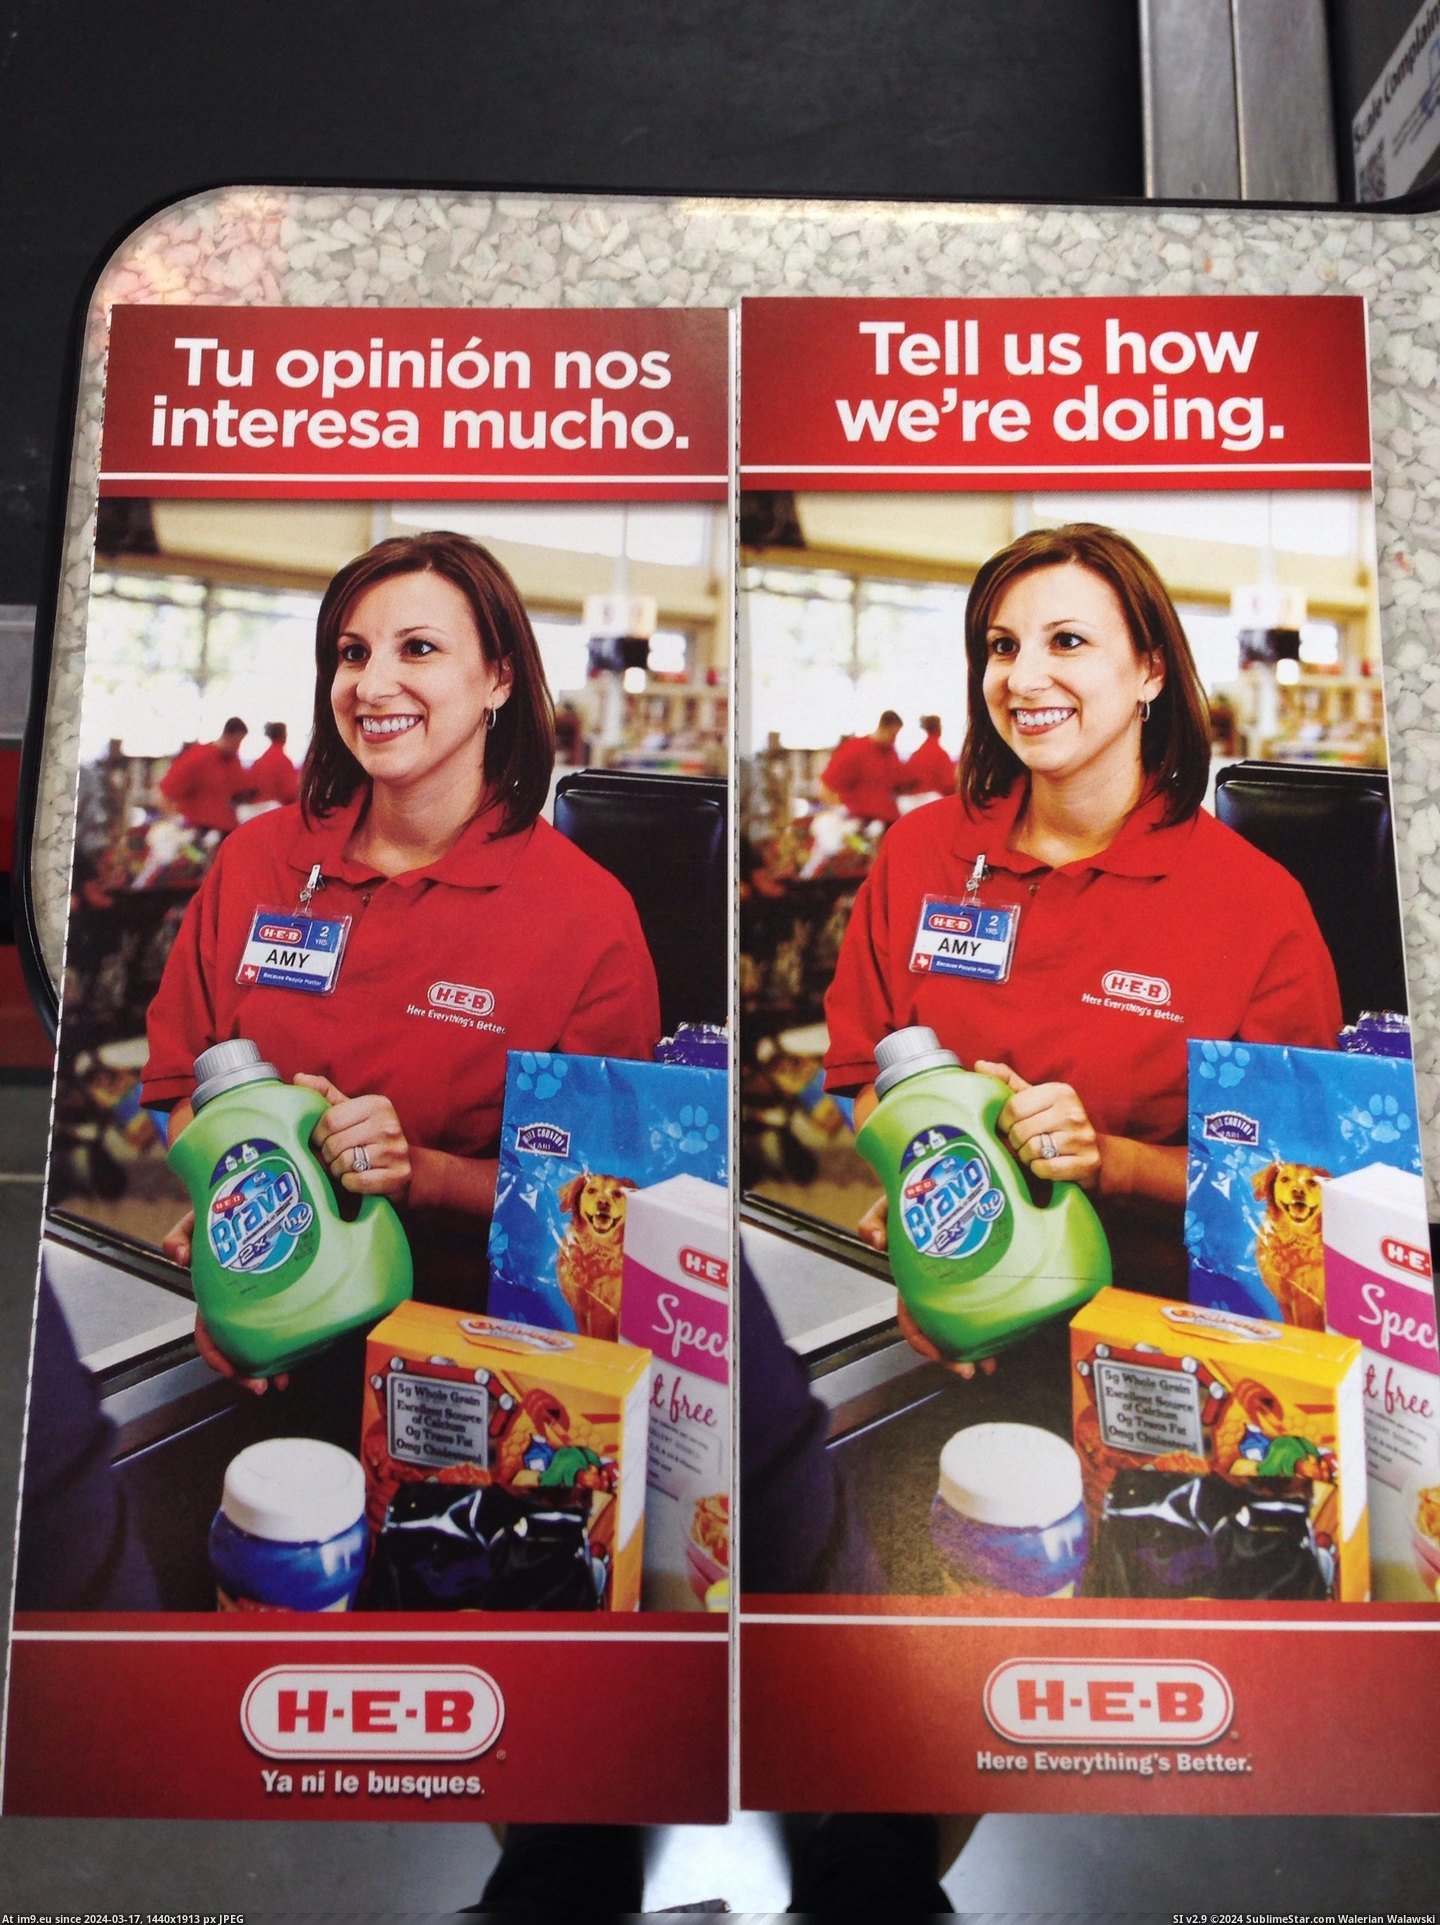 #English #Filter #Pamphlet #Spanish [Mildlyinteresting] The English version of this pamphlet has a different filter than the Spanish version. Pic. (Изображение из альбом My r/MILDLYINTERESTING favs))